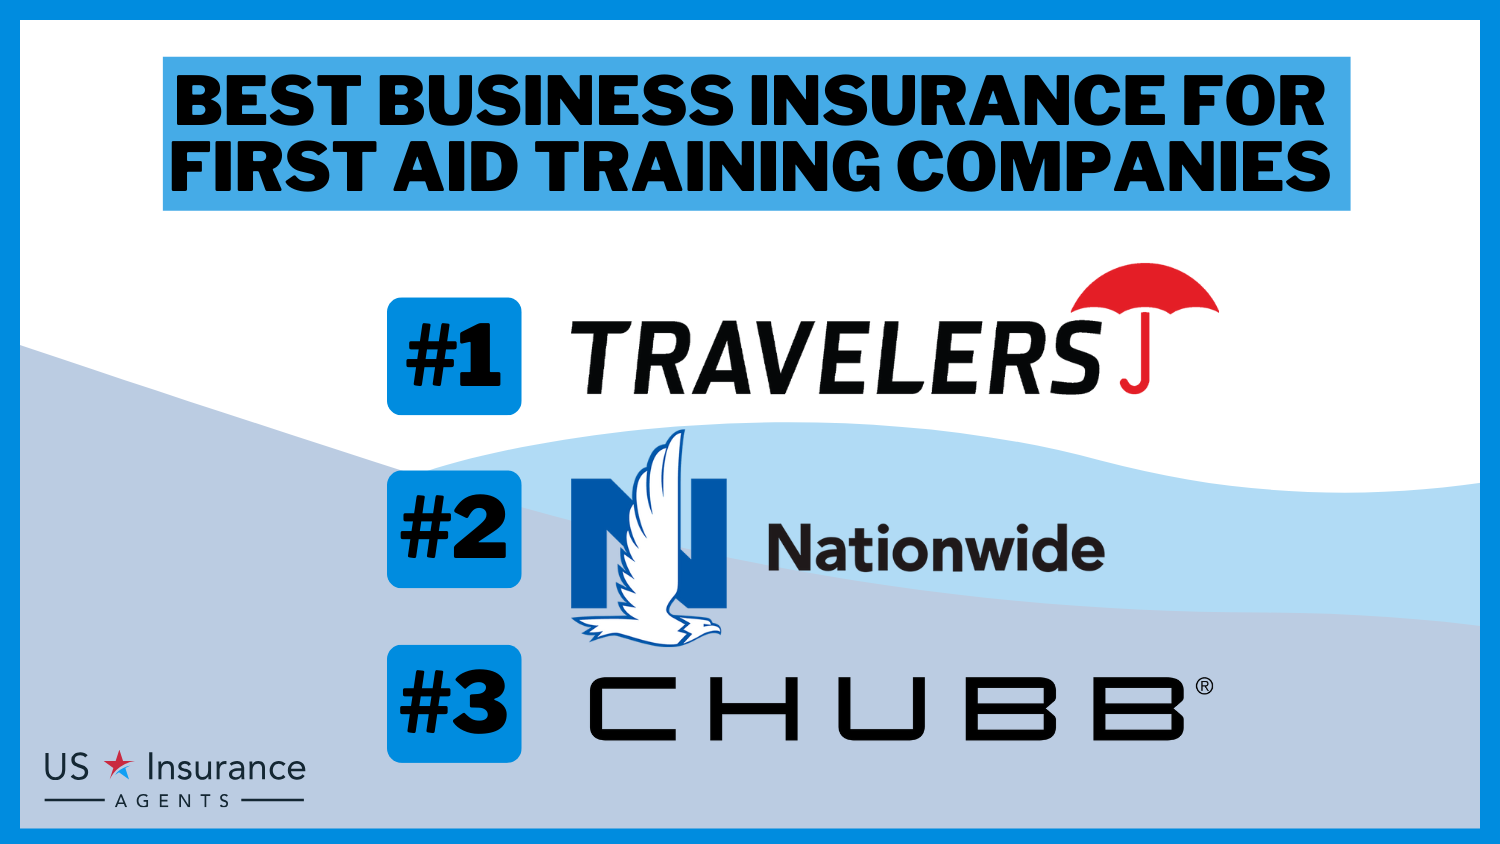 Best Business Insurance for First Aid Training Companies: Travelers, Nationwide and Chubb